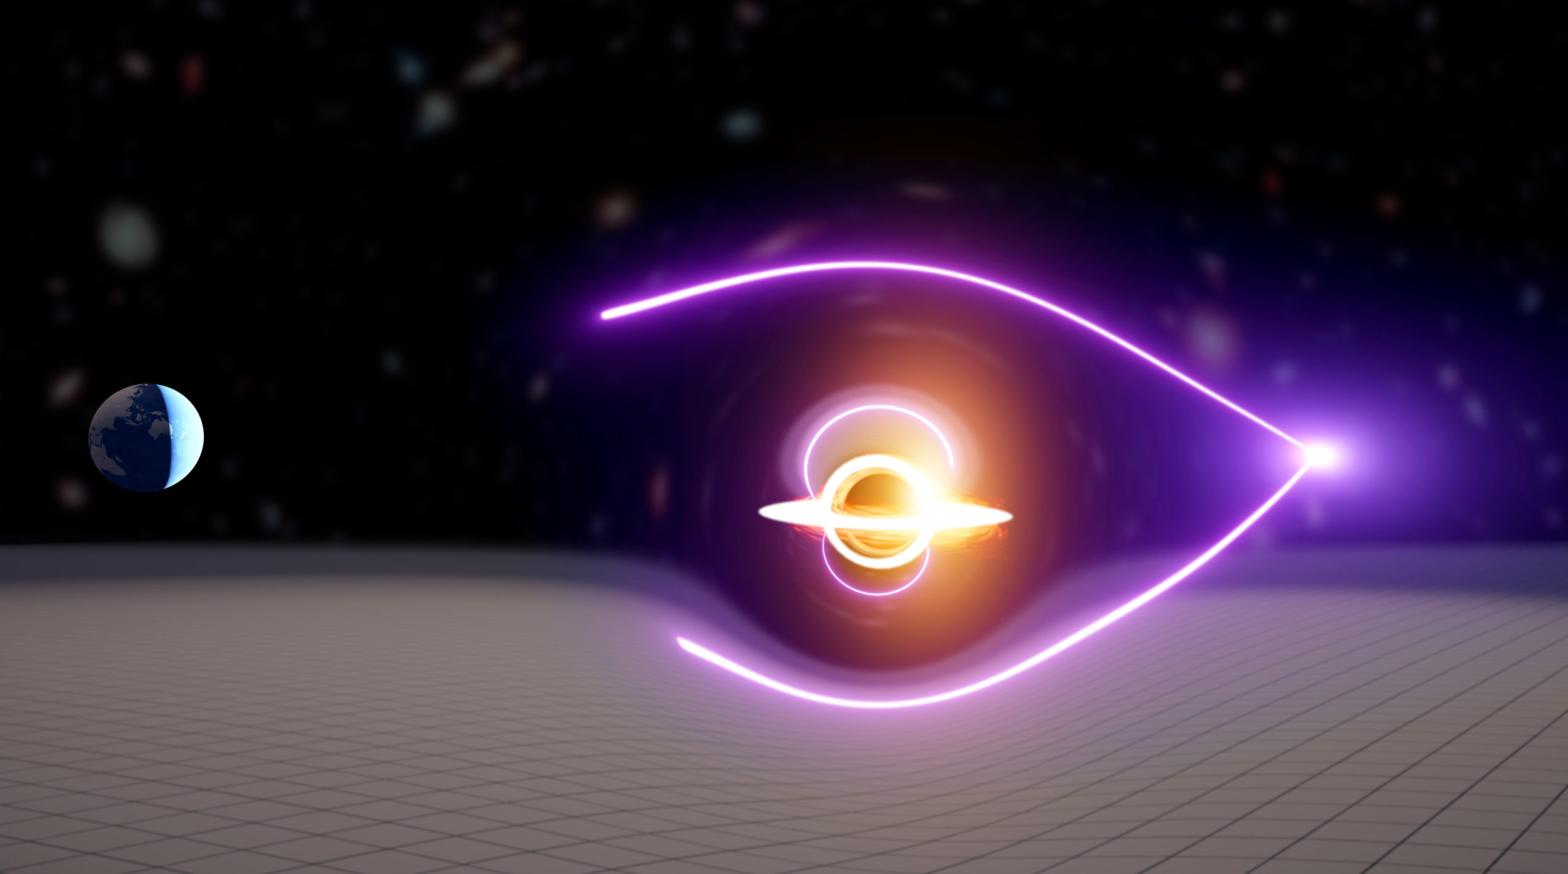 The gamma rays would bend around the black hole and return slightly offset signatures on the other side. (Illustration: Carl Knox, OzGrav)